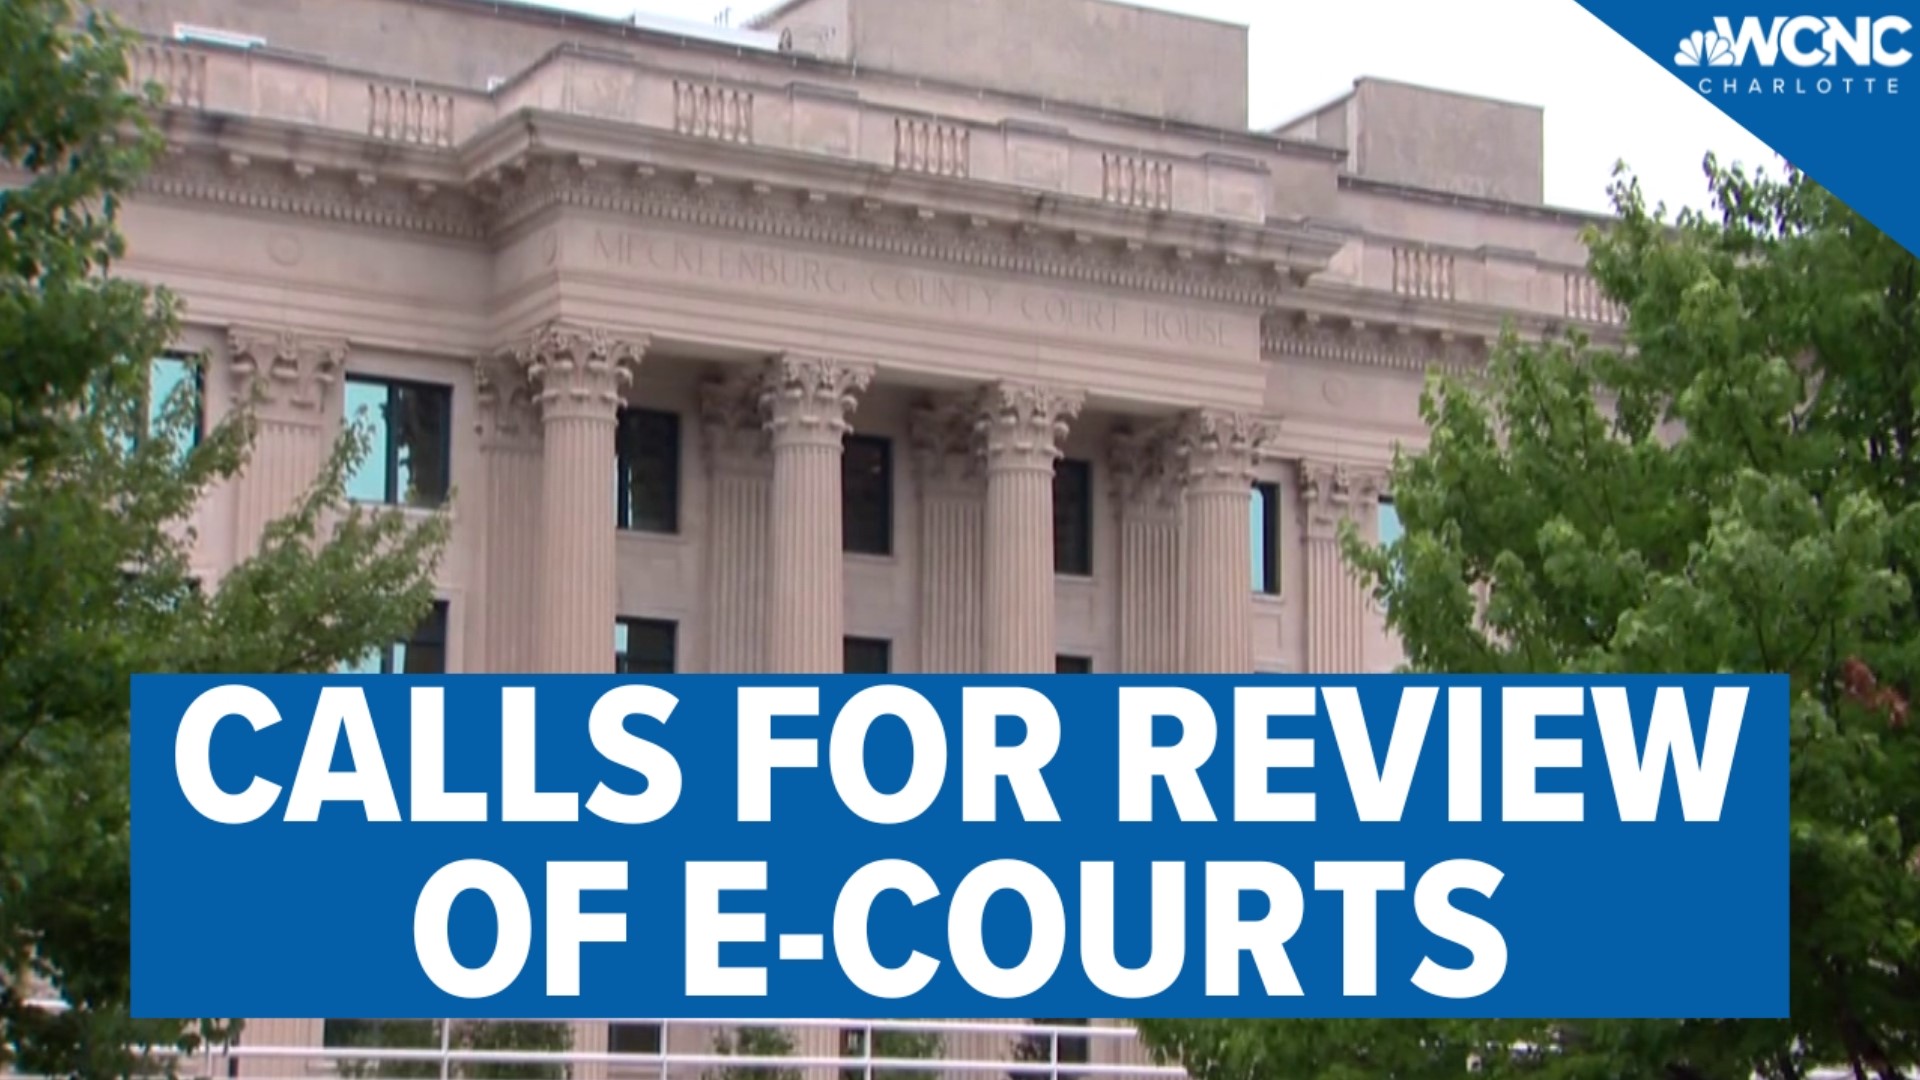 In February, North Carolina began testing its eCourts system in four counties - Harnett, Johnston, Lee, and Wake - in hopes of moving it statewide in the future.